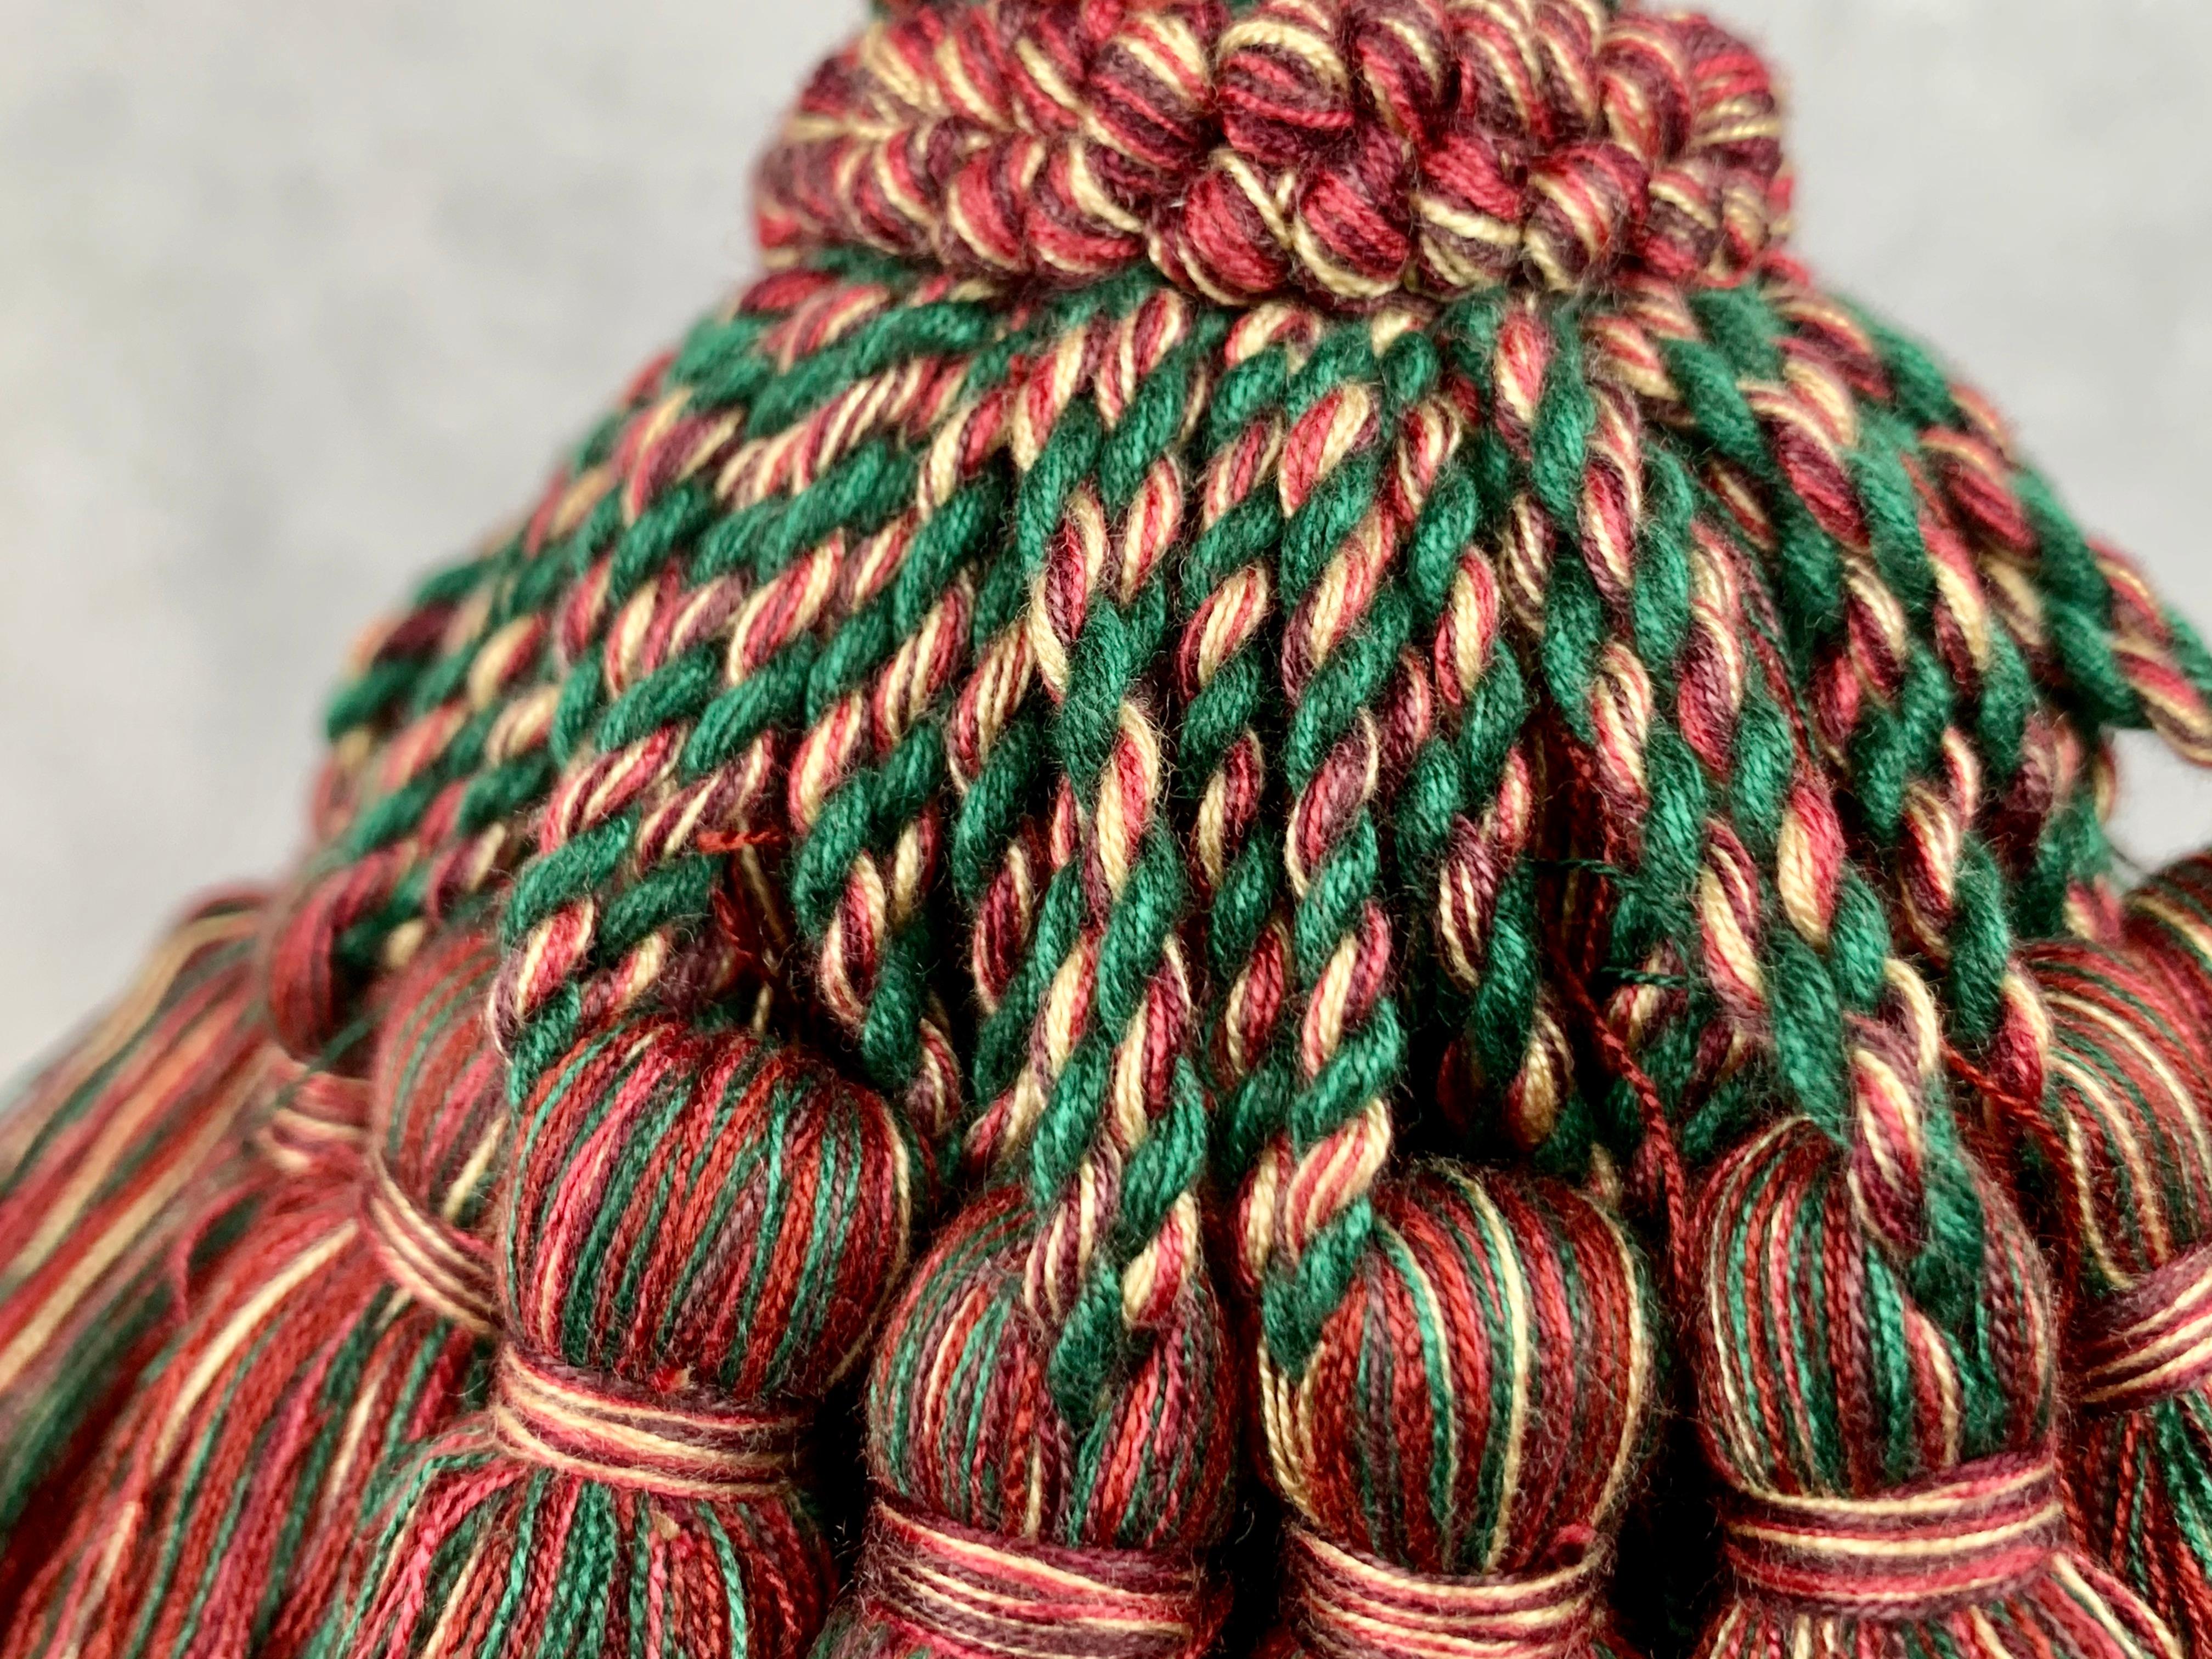 Hand-Crafted Houlés Passementerie Key Tassel or Gland Cle in Red/Green, Paris